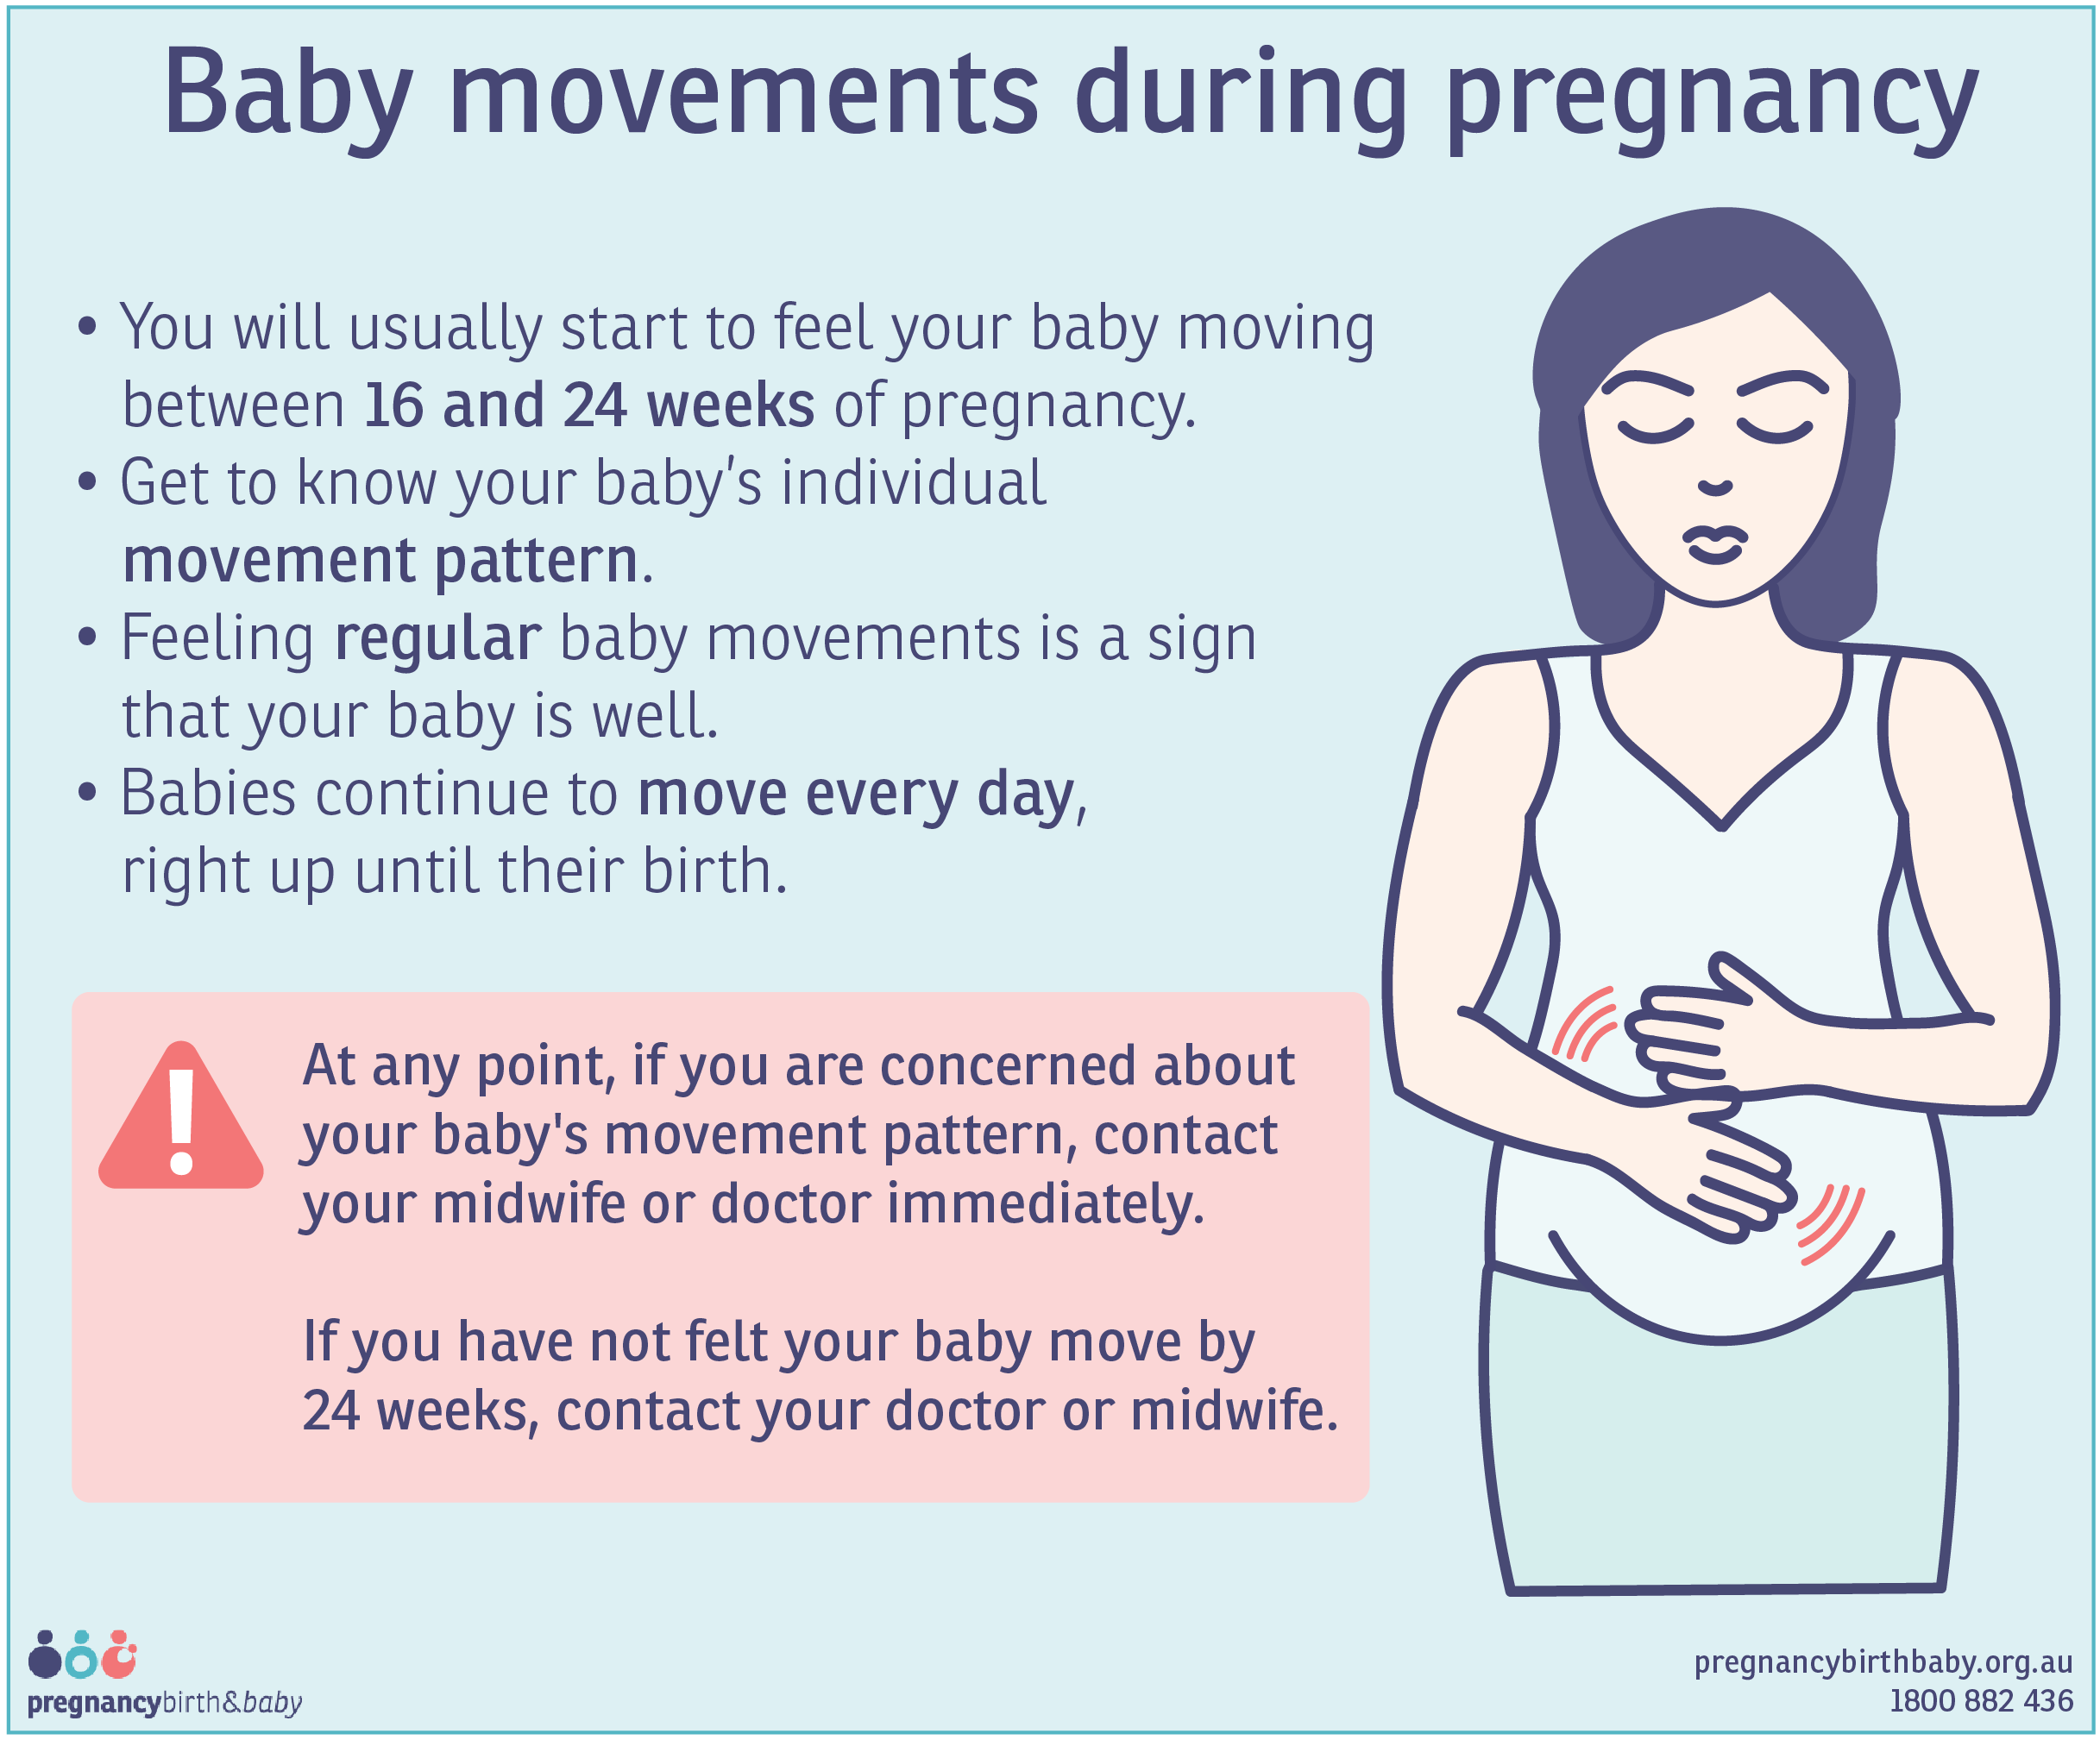 Baby movements during pregnancy